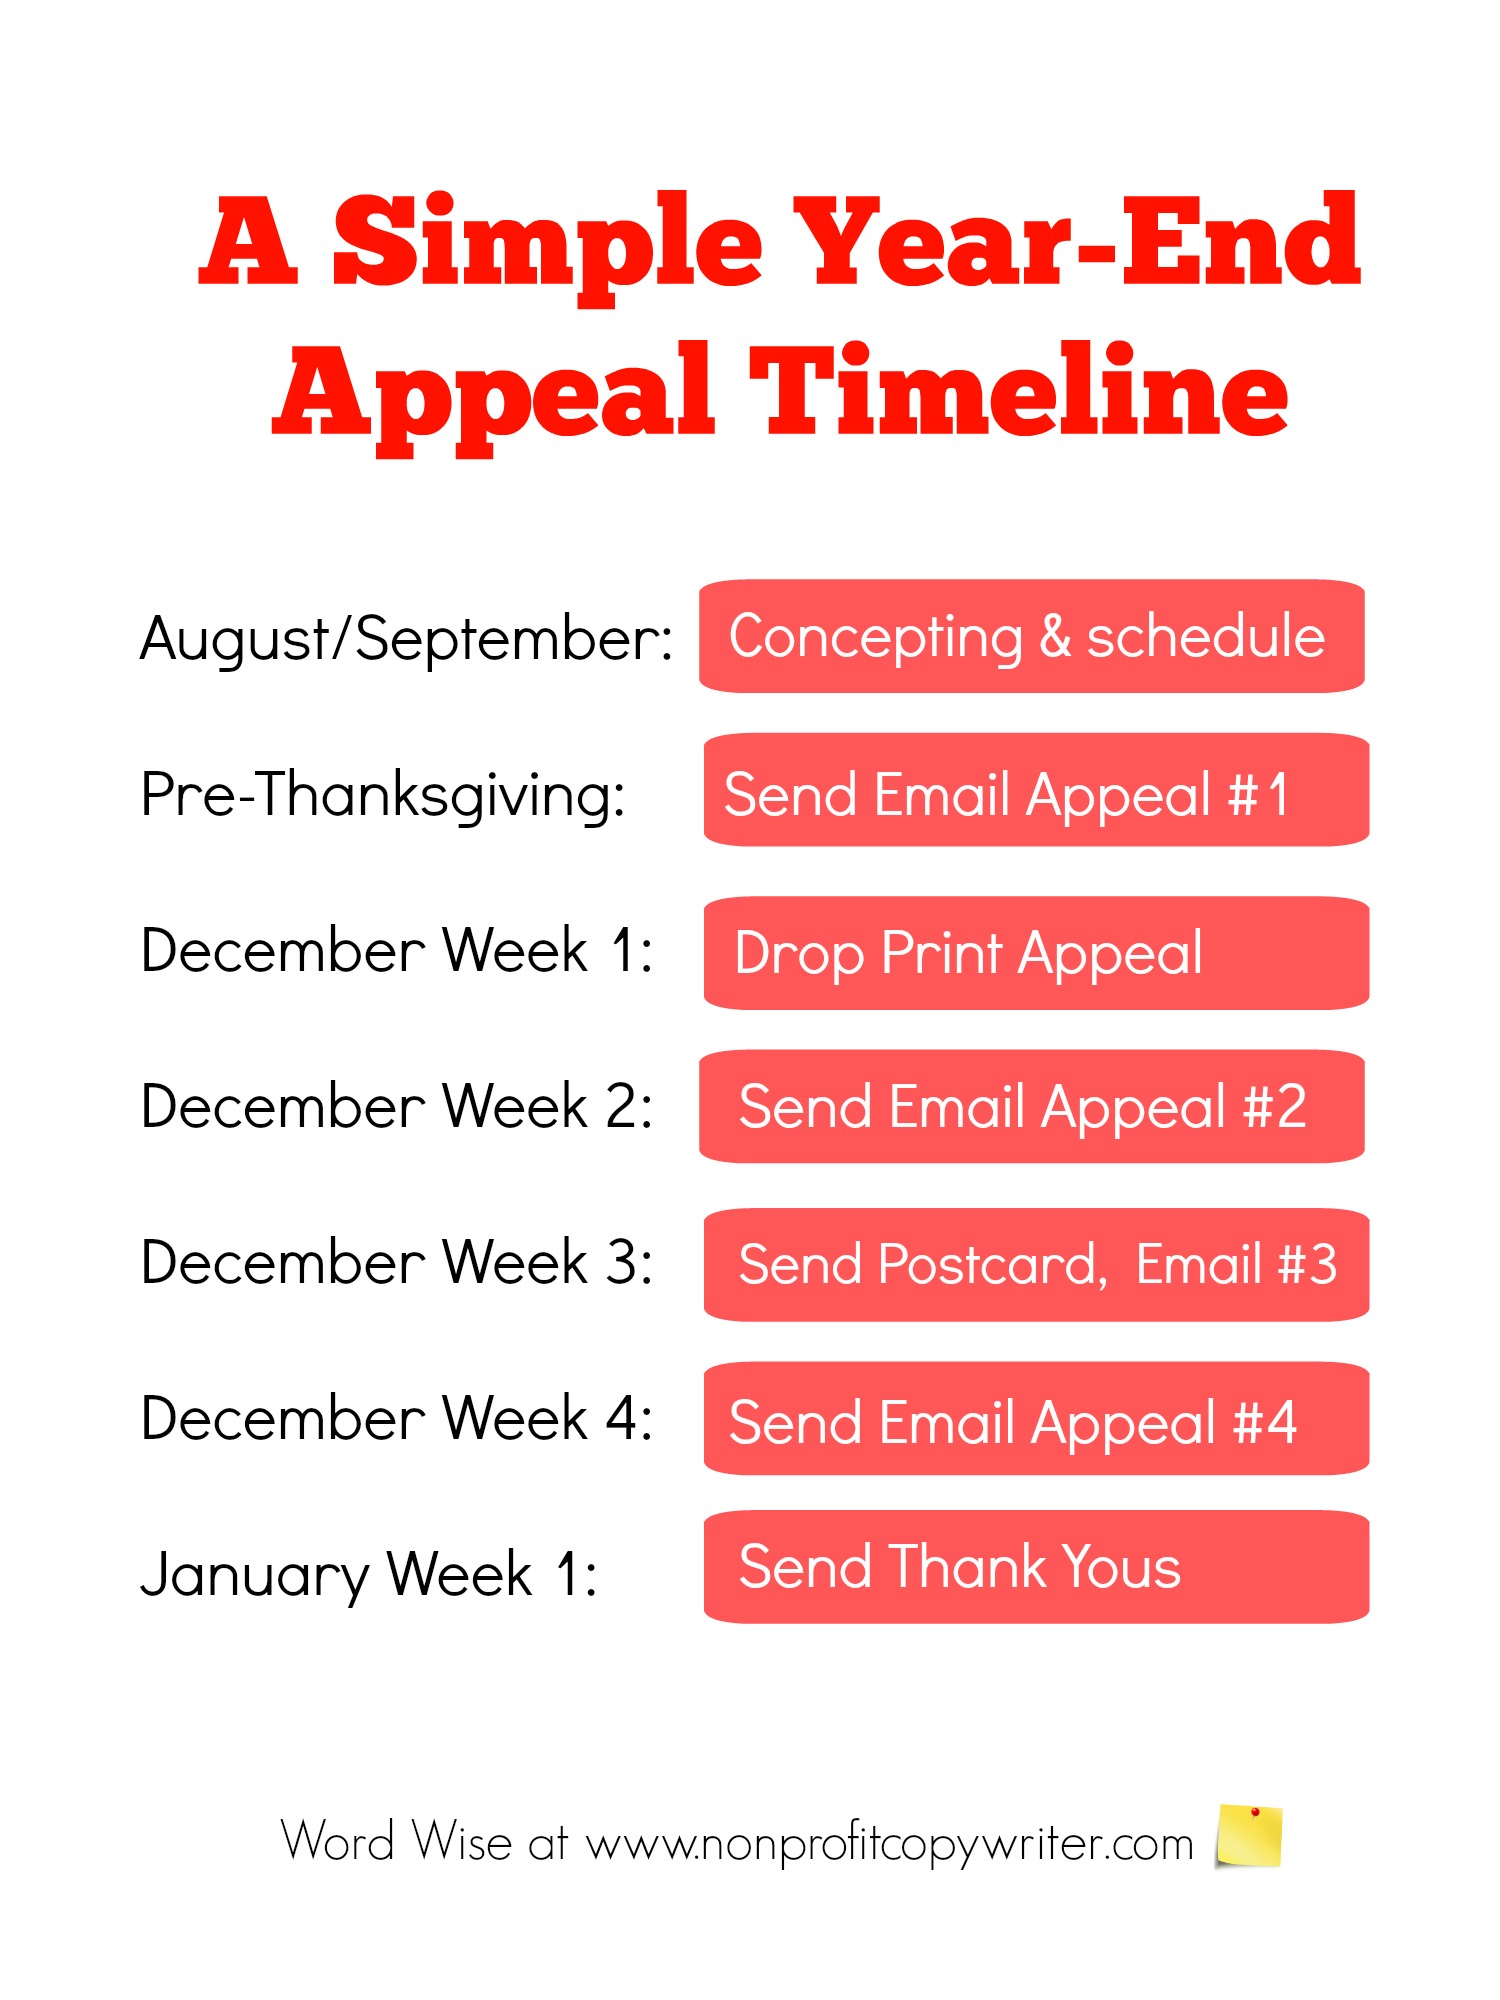 A simple year-end appeal timeline with Word Wise at Nonprofit Copywriter